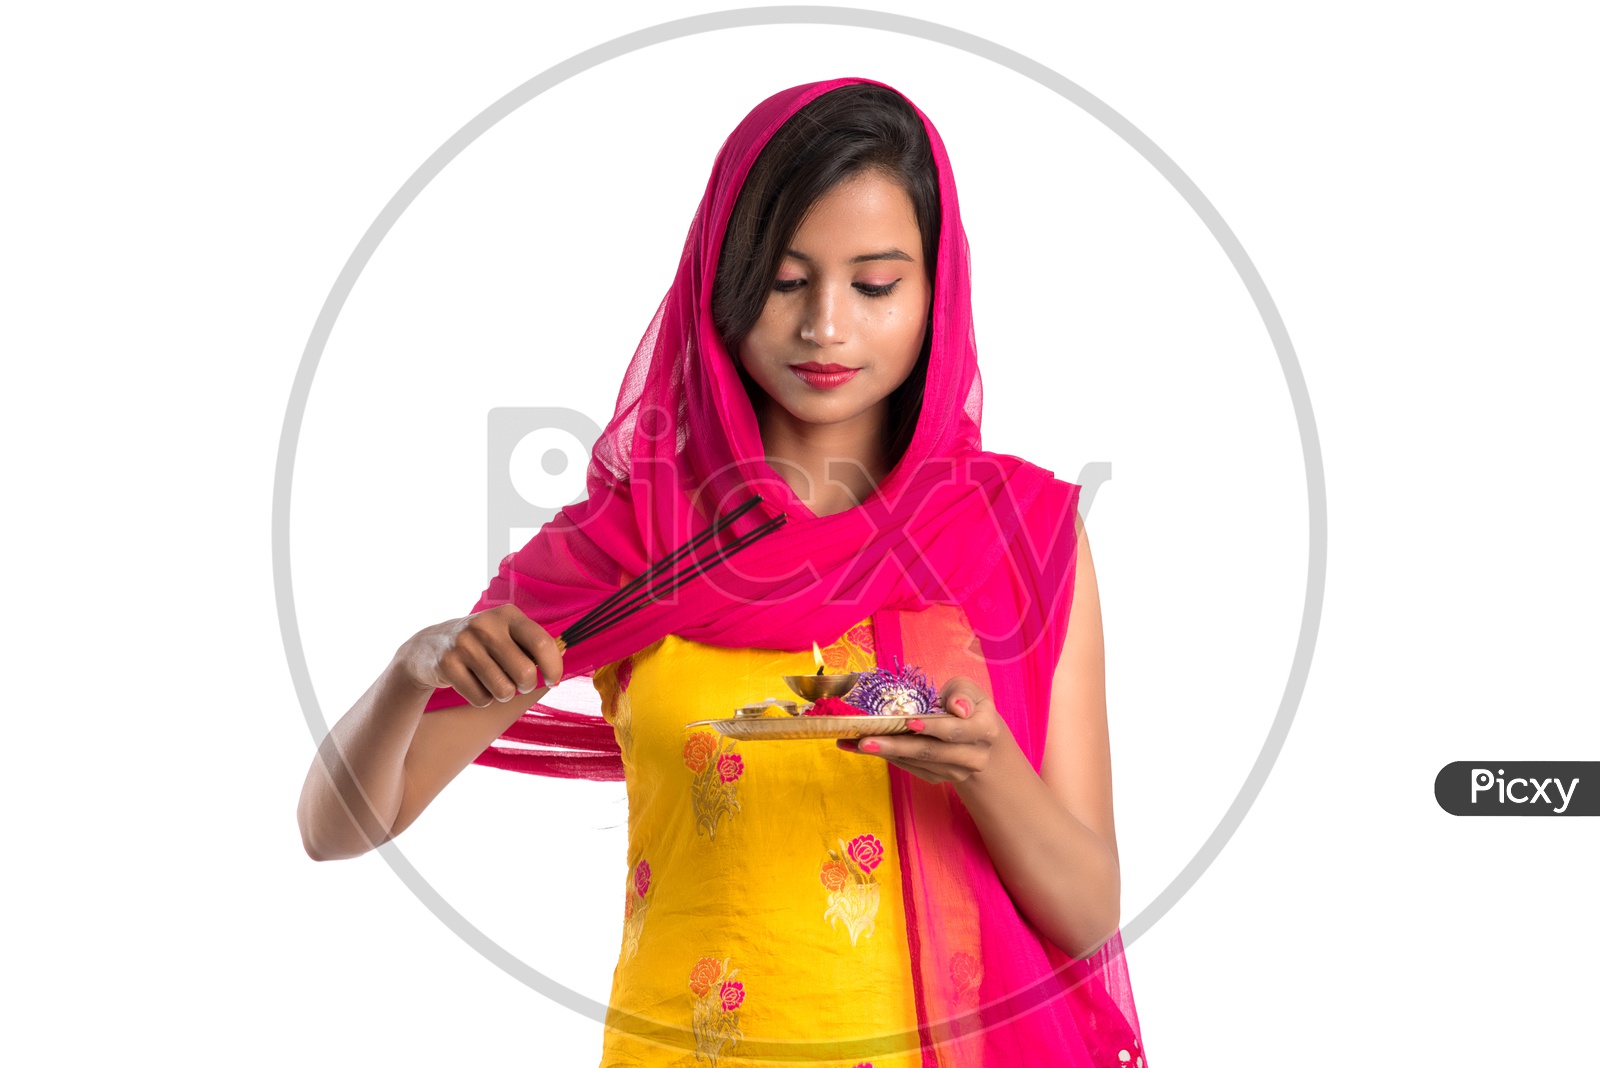 Beautiful Indian Girl Holding Pooja Thali Or Pooja Plate  In Hand and Lighting Fragrance Sticks ( Agarbatthi )